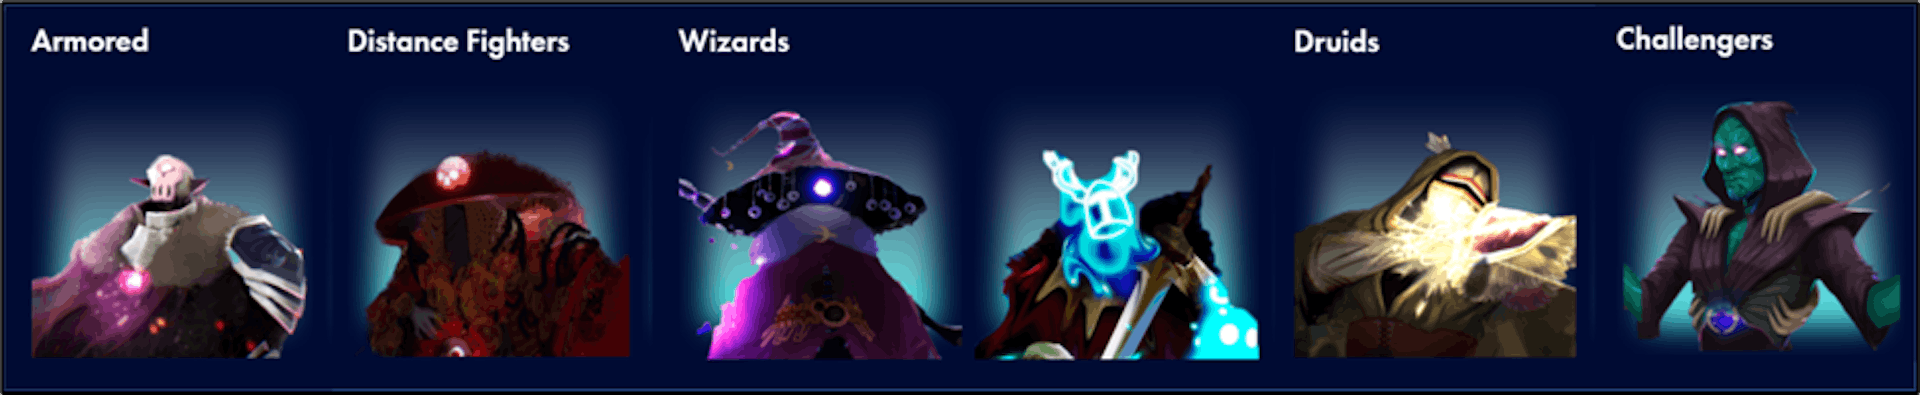 Sneak peek at some of the Magic Craft characters or Heroes (source)